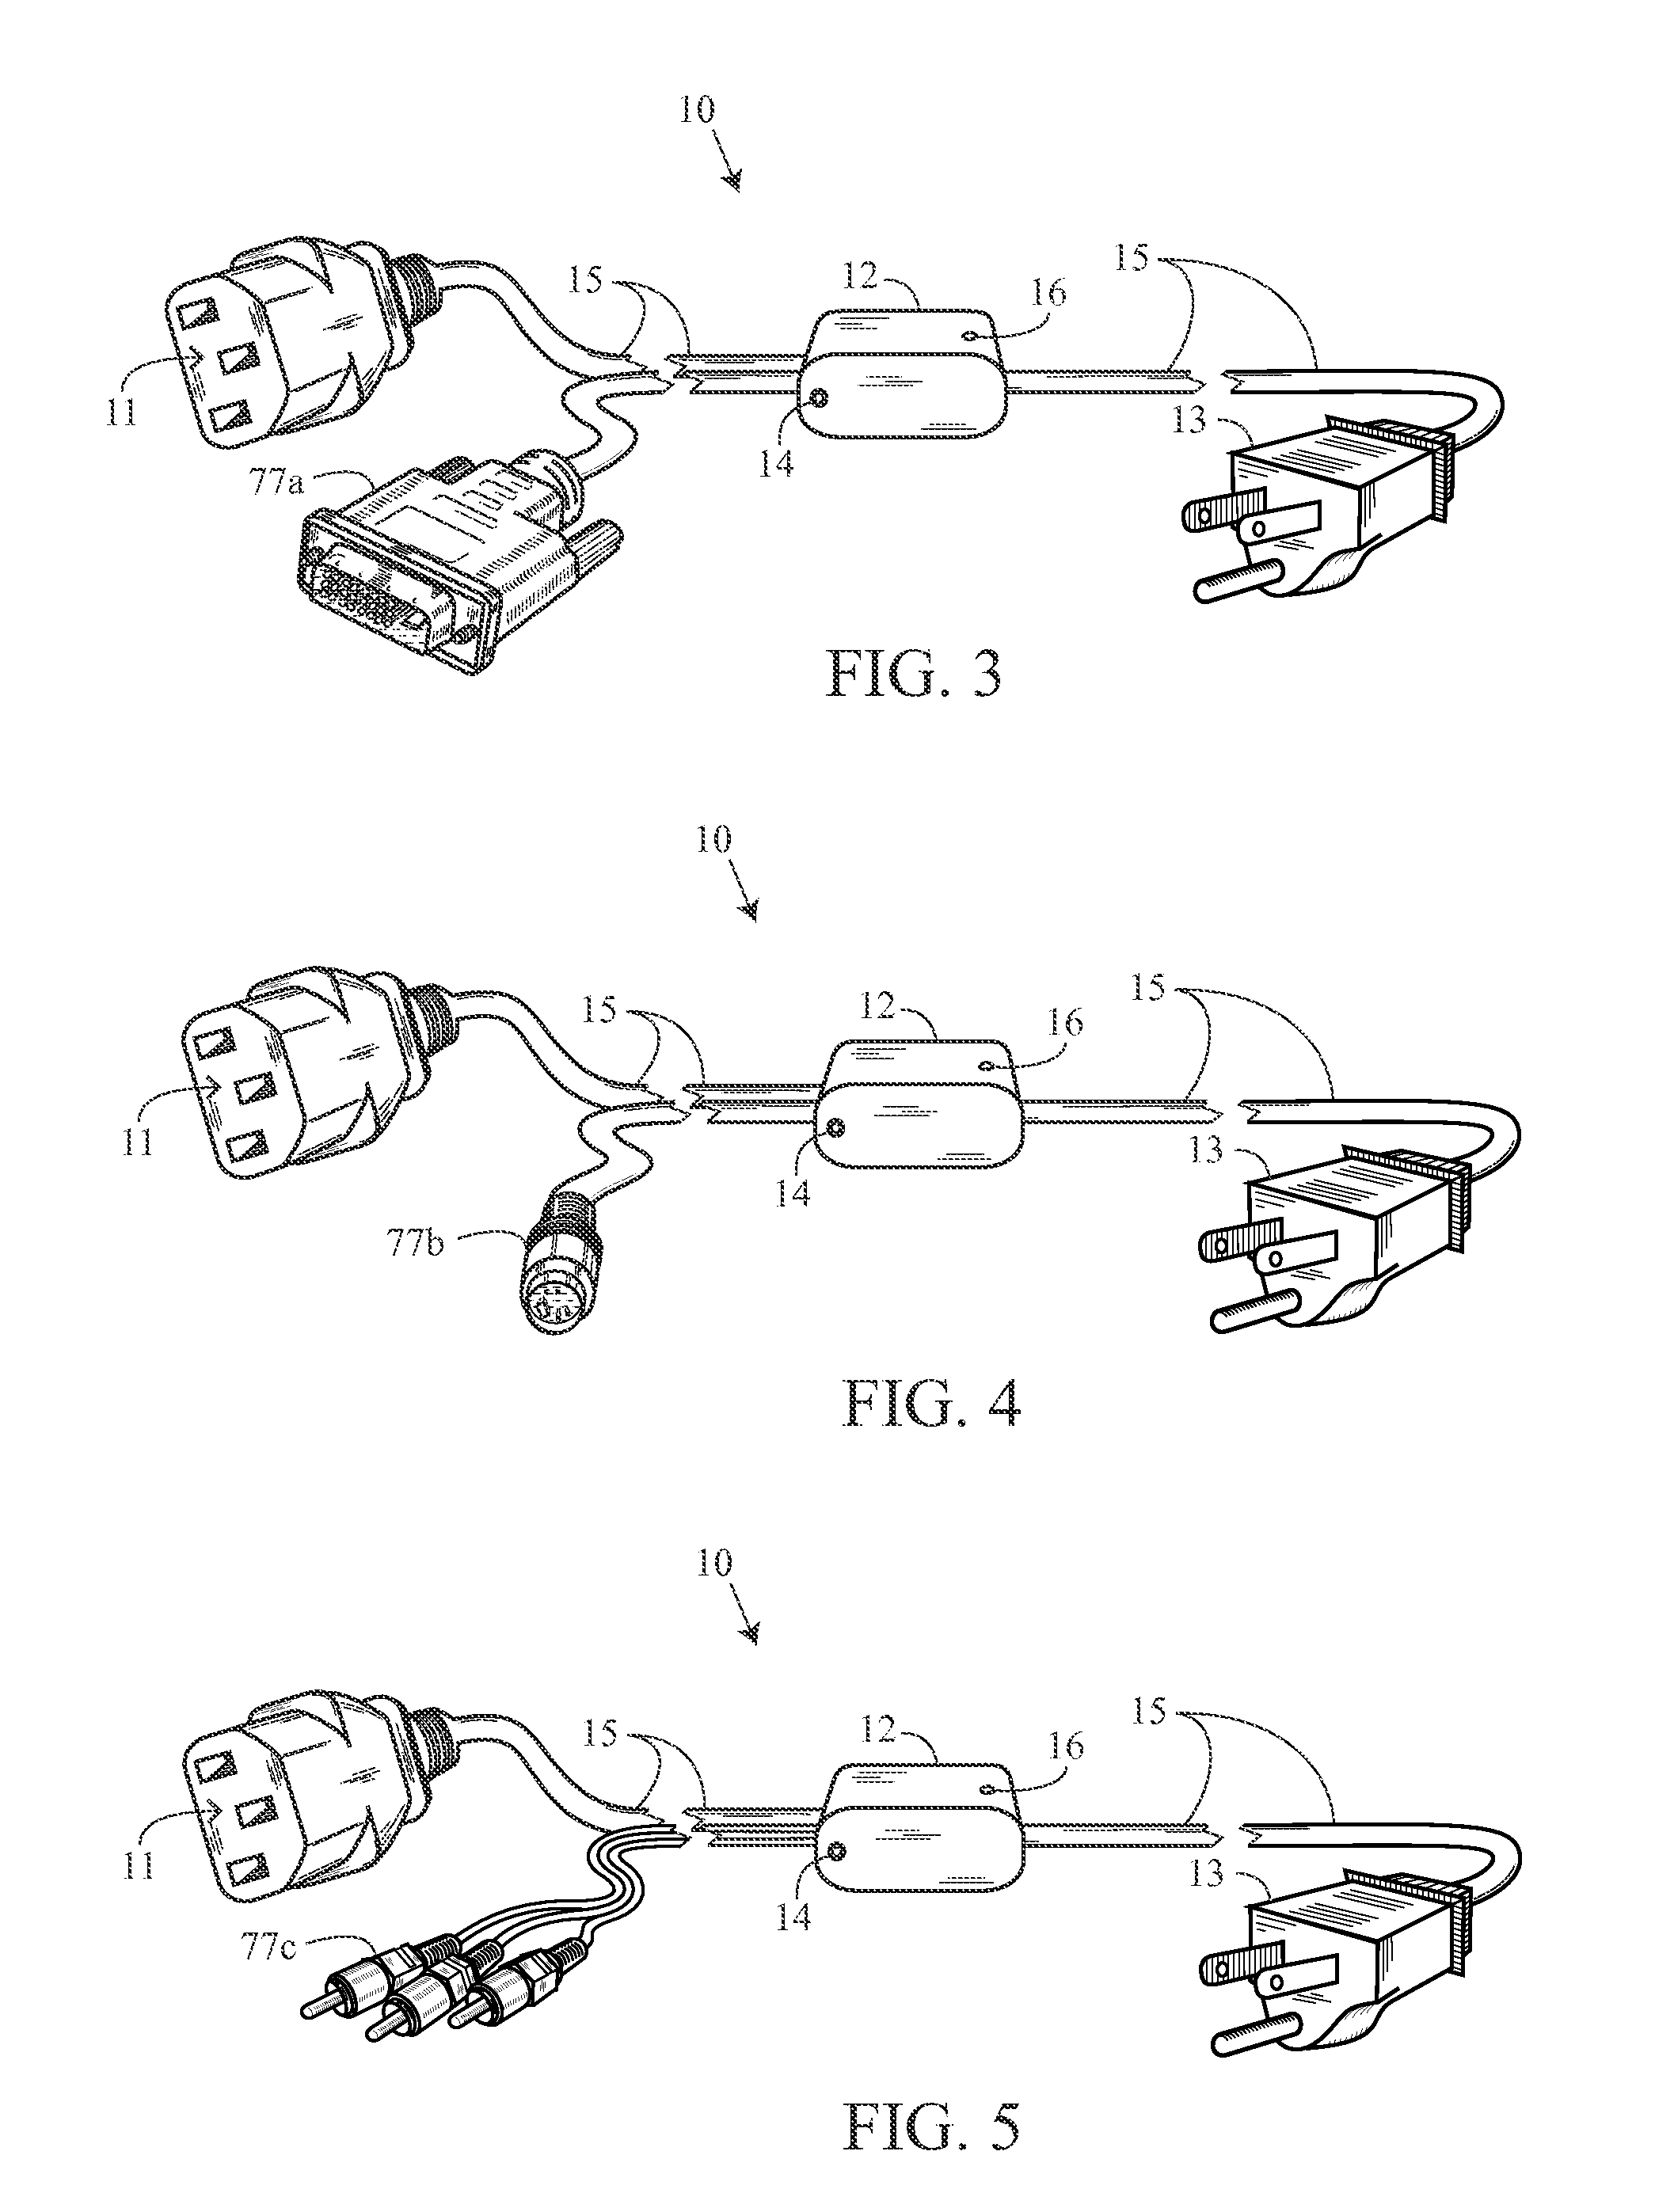 Method And System For Transmitting Data To And From A Television